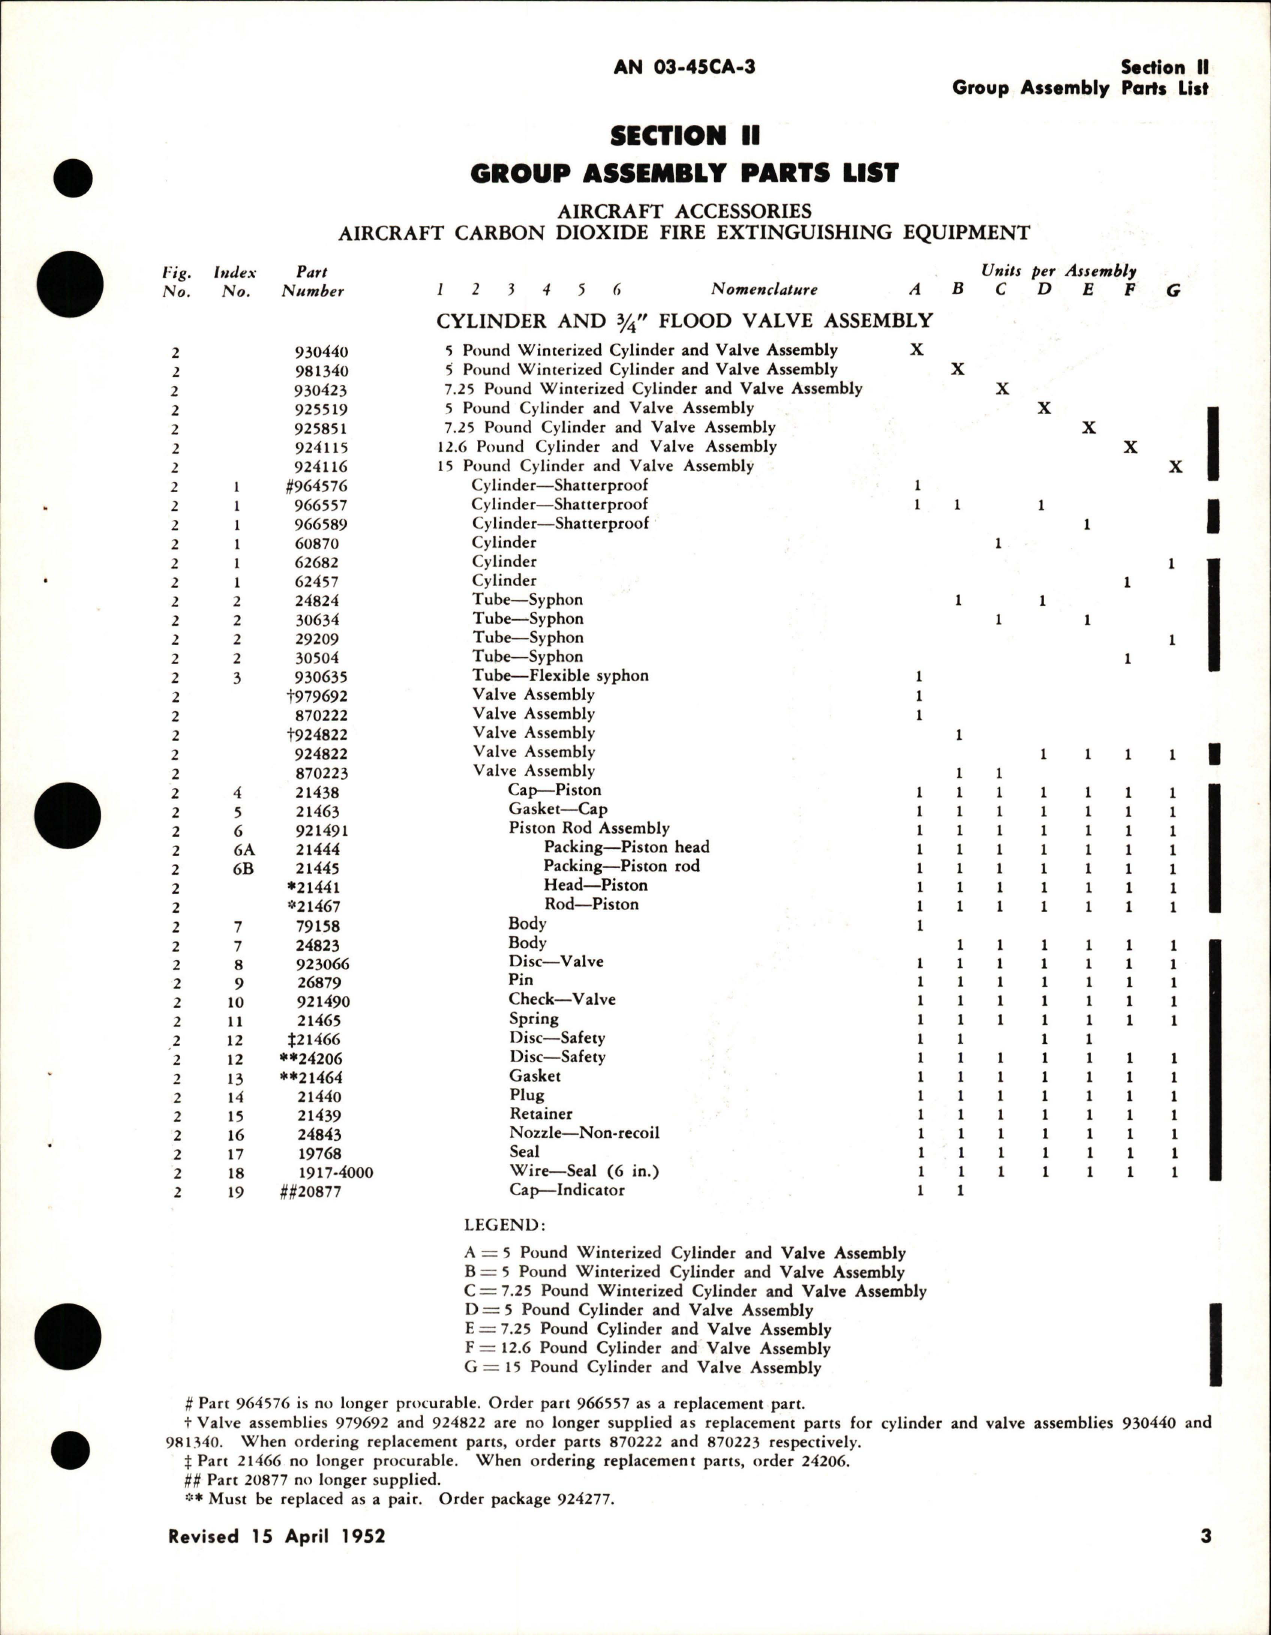 Sample page 9 from AirCorps Library document: Parts Catalog for Airborne CO2 Fire Extinguisher System 